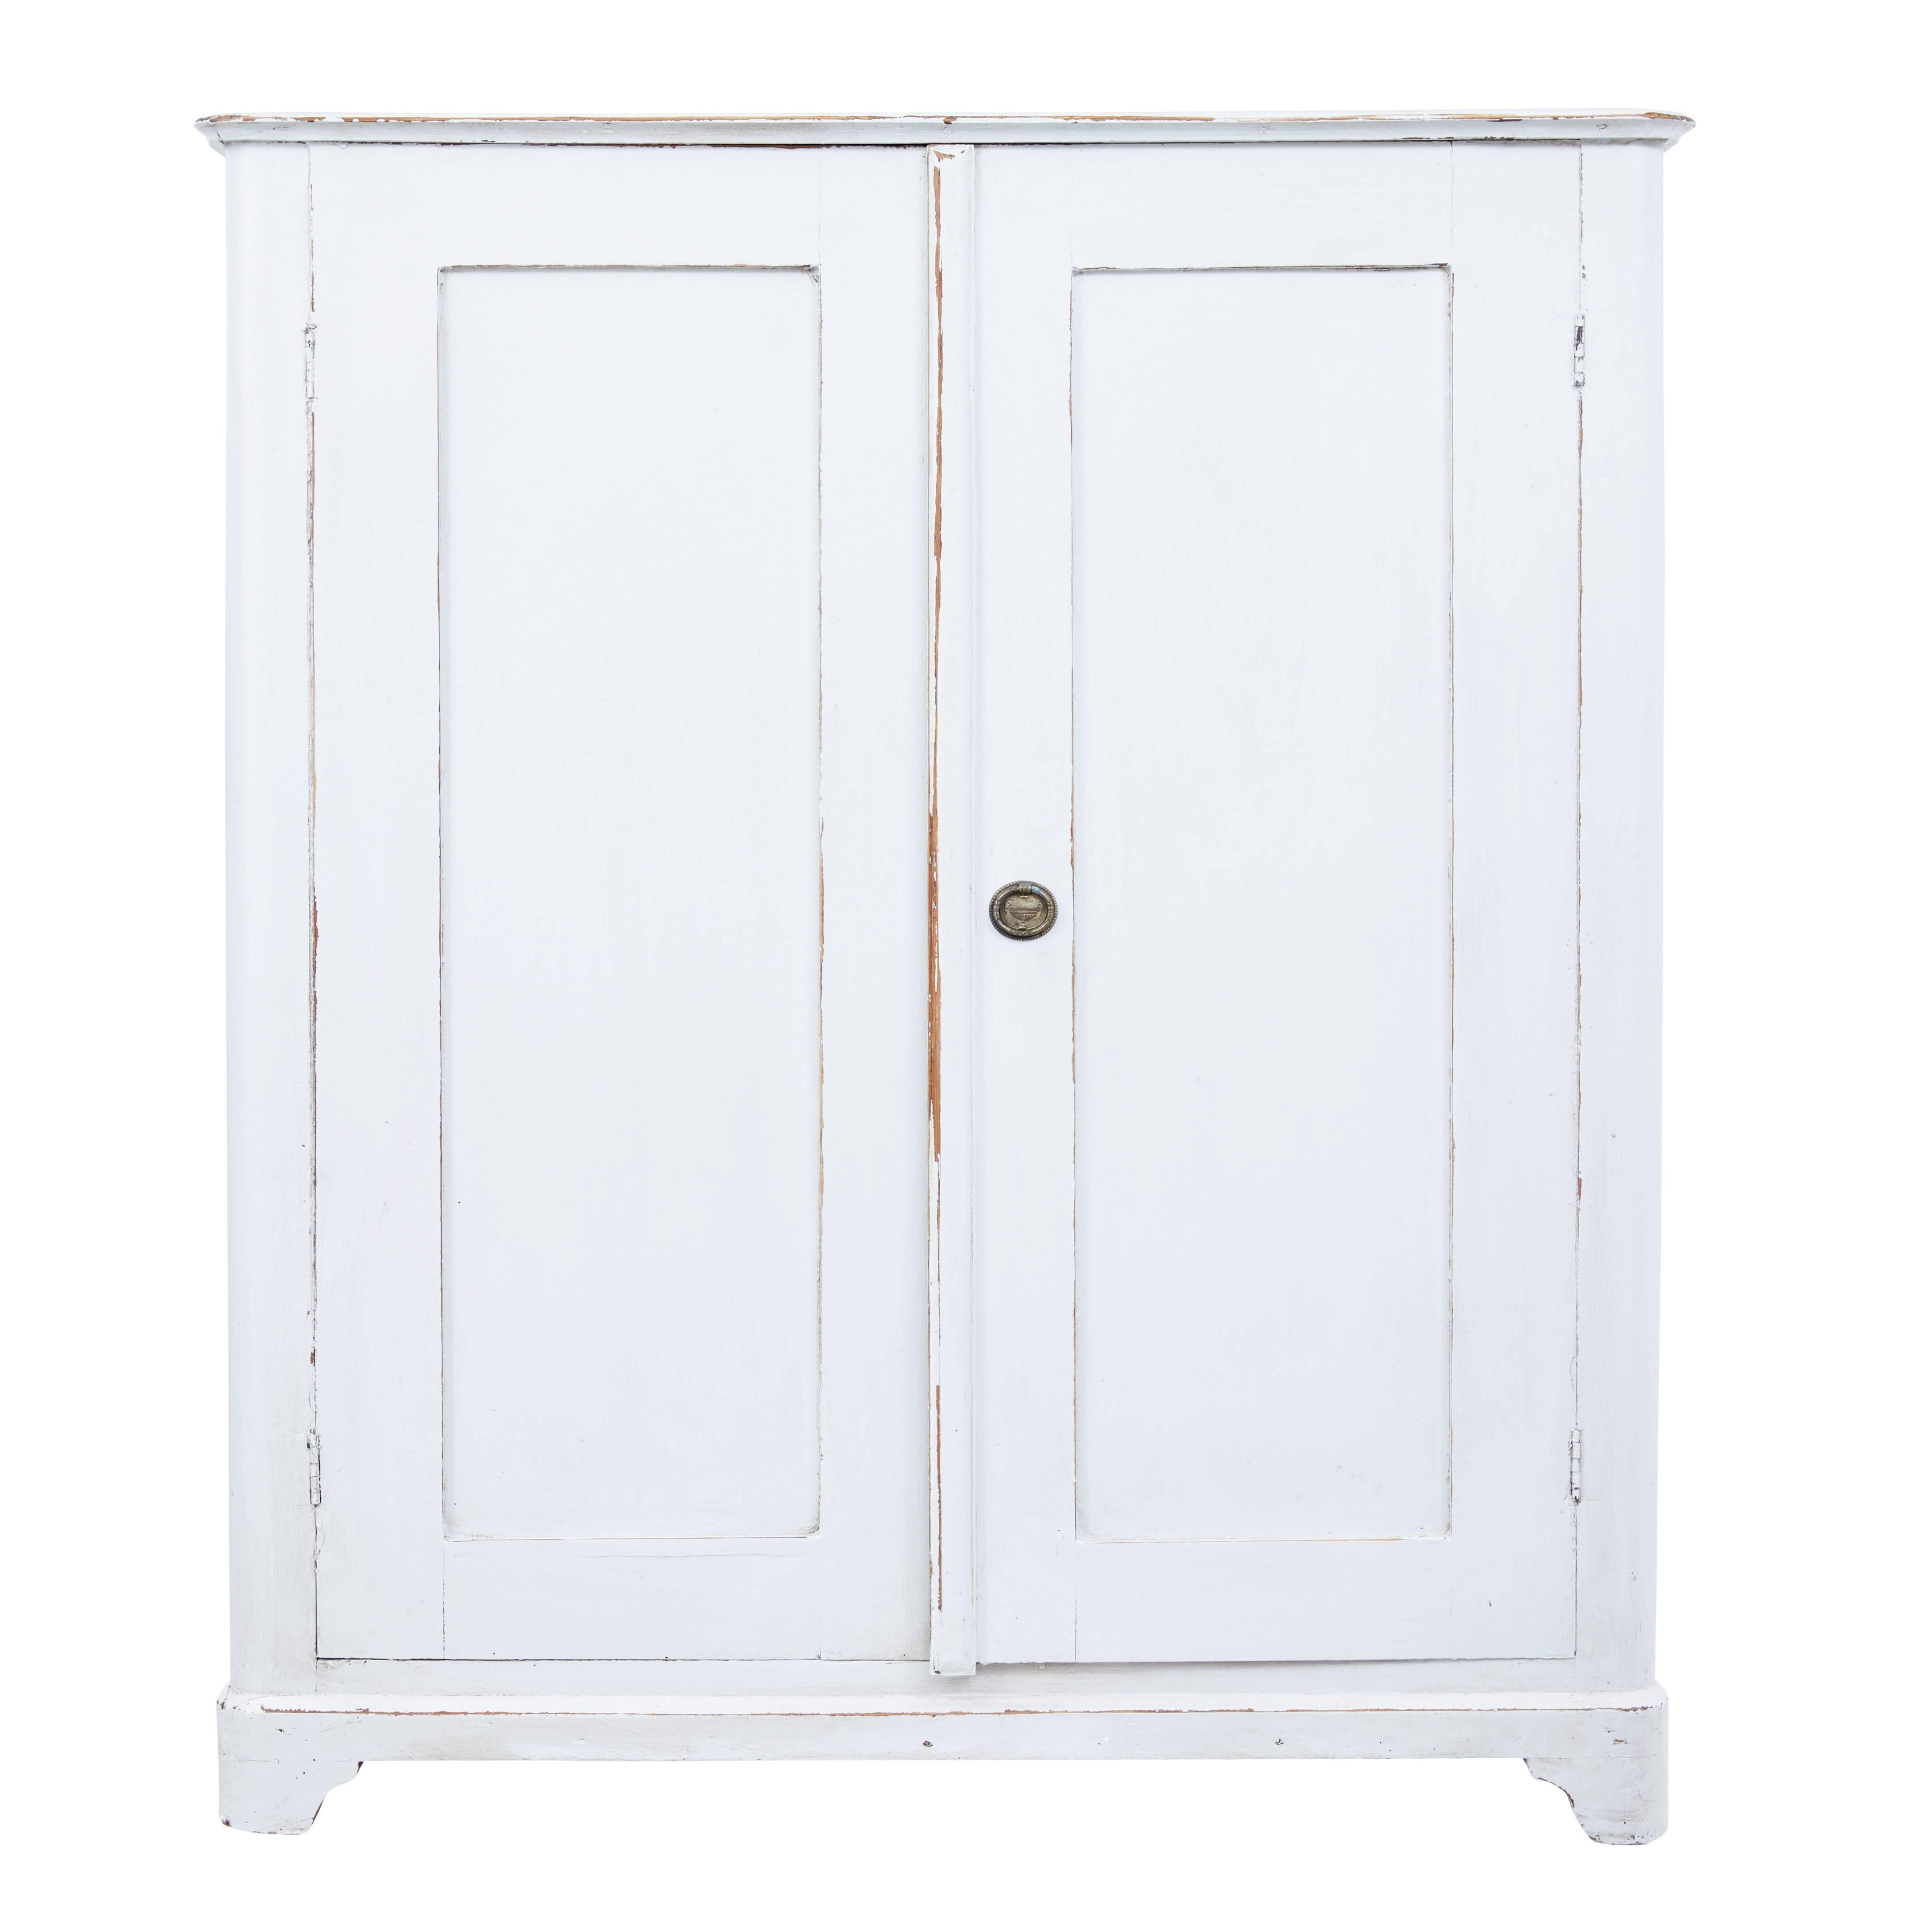 Practical piece of rustic furniture, circa 1880.

Later painted in an off white color which is showing signs of wear.

Double doors open to a partially fitted interior, three drawers to the top and an open slot where the fourth drawer would have